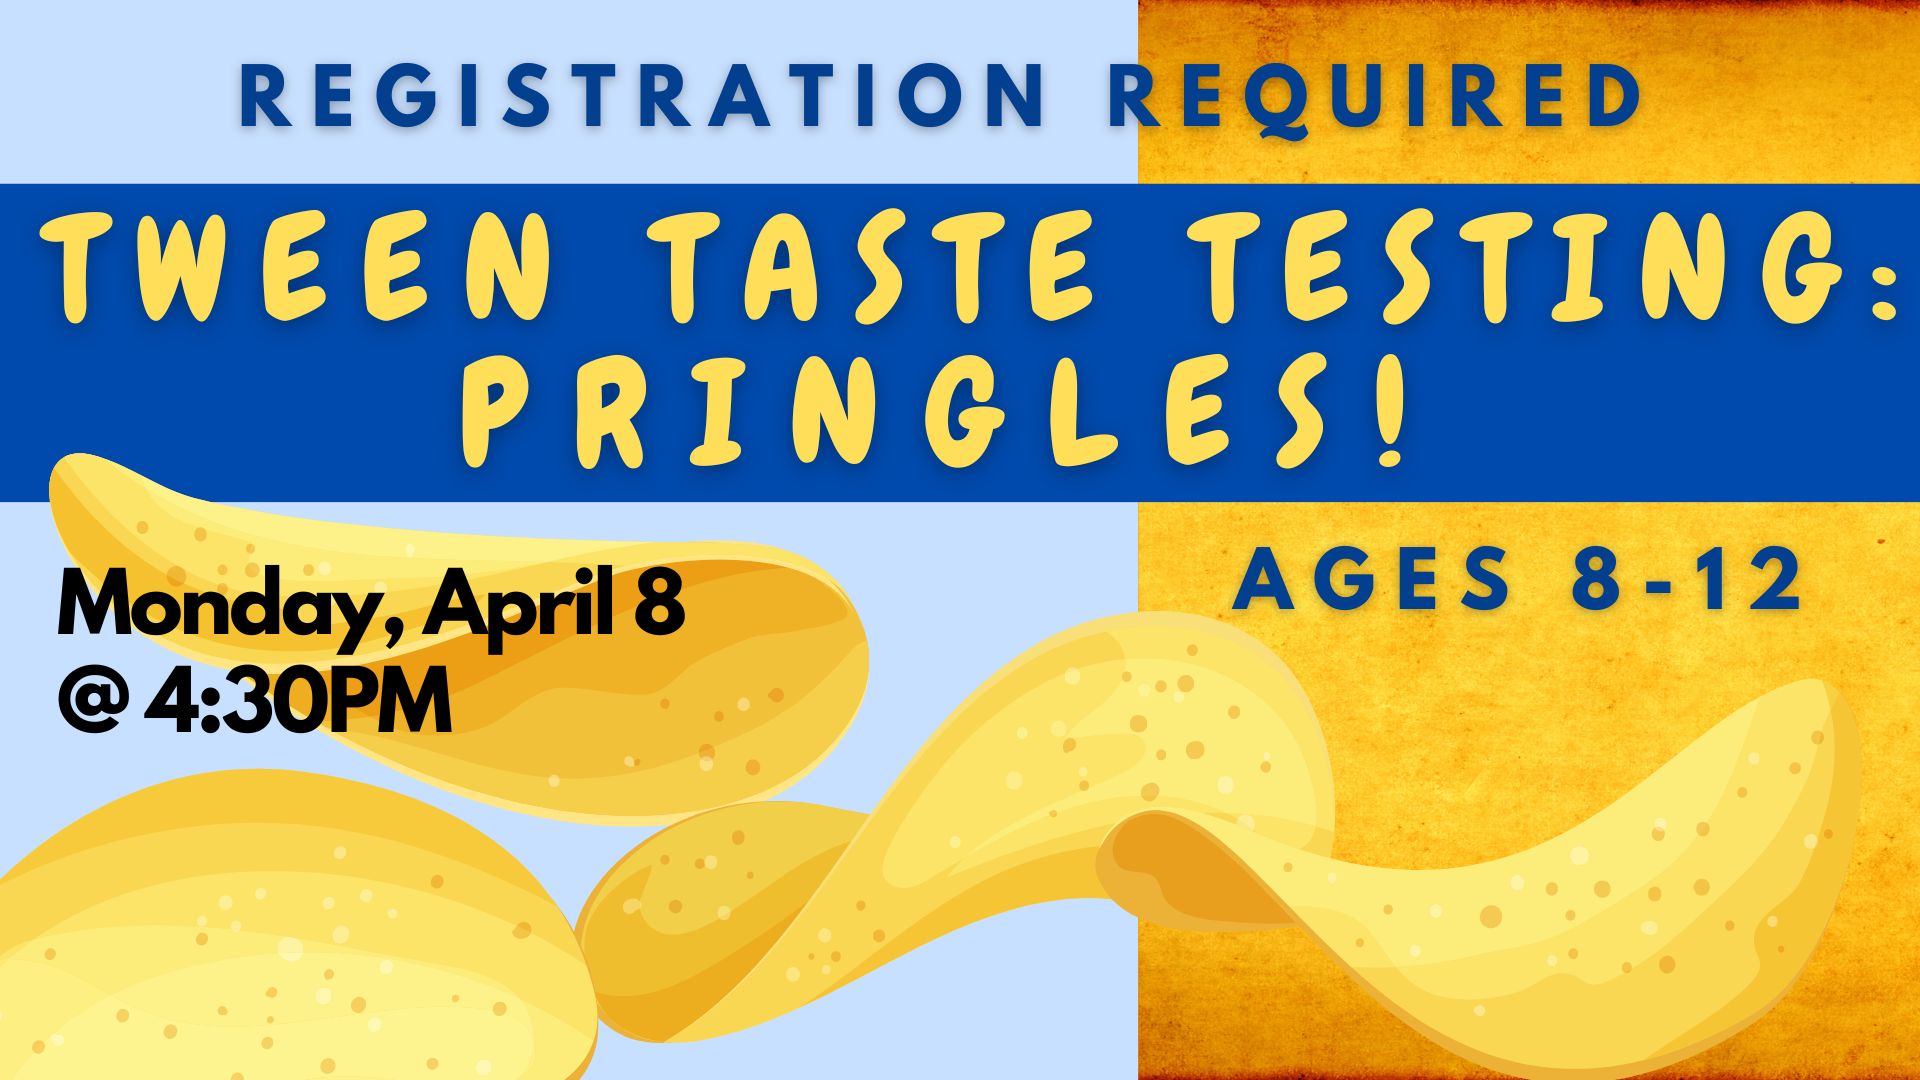 Graphic of pringles chips on blue and orange background.   Text reads: Tween Taste Testing Pringles. Monday, April 8 at 4:30 pm.   Ages 8-12.   Registration Required.